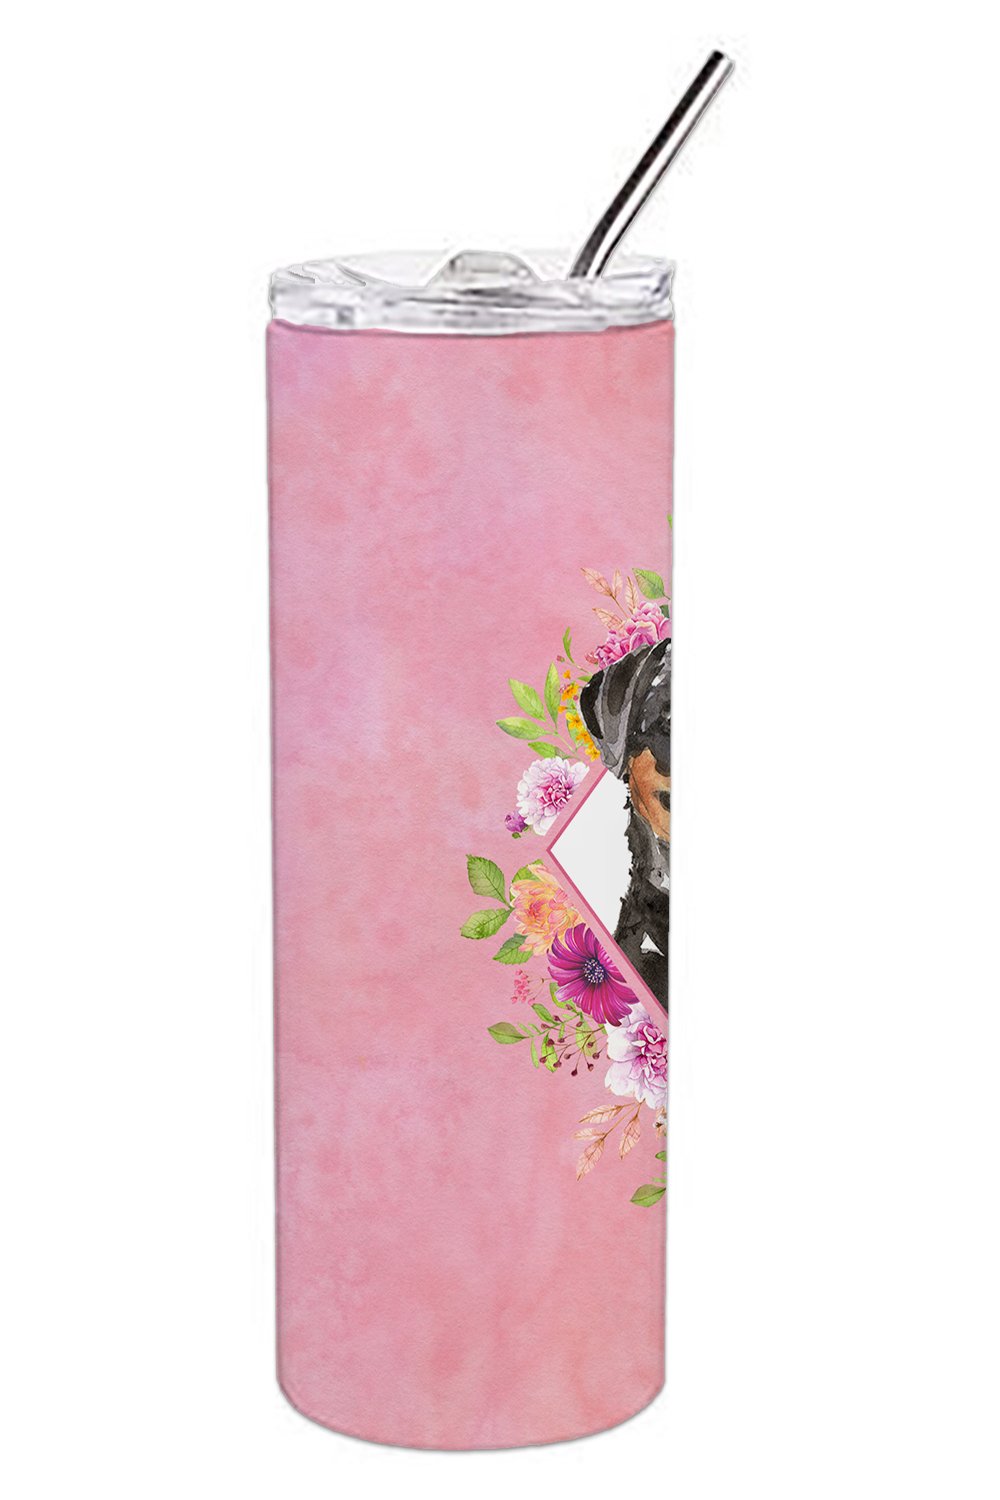 Rottweiler Pink Flowers Double Walled Stainless Steel 20 oz Skinny Tumbler CK4217TBL20 by Caroline's Treasures